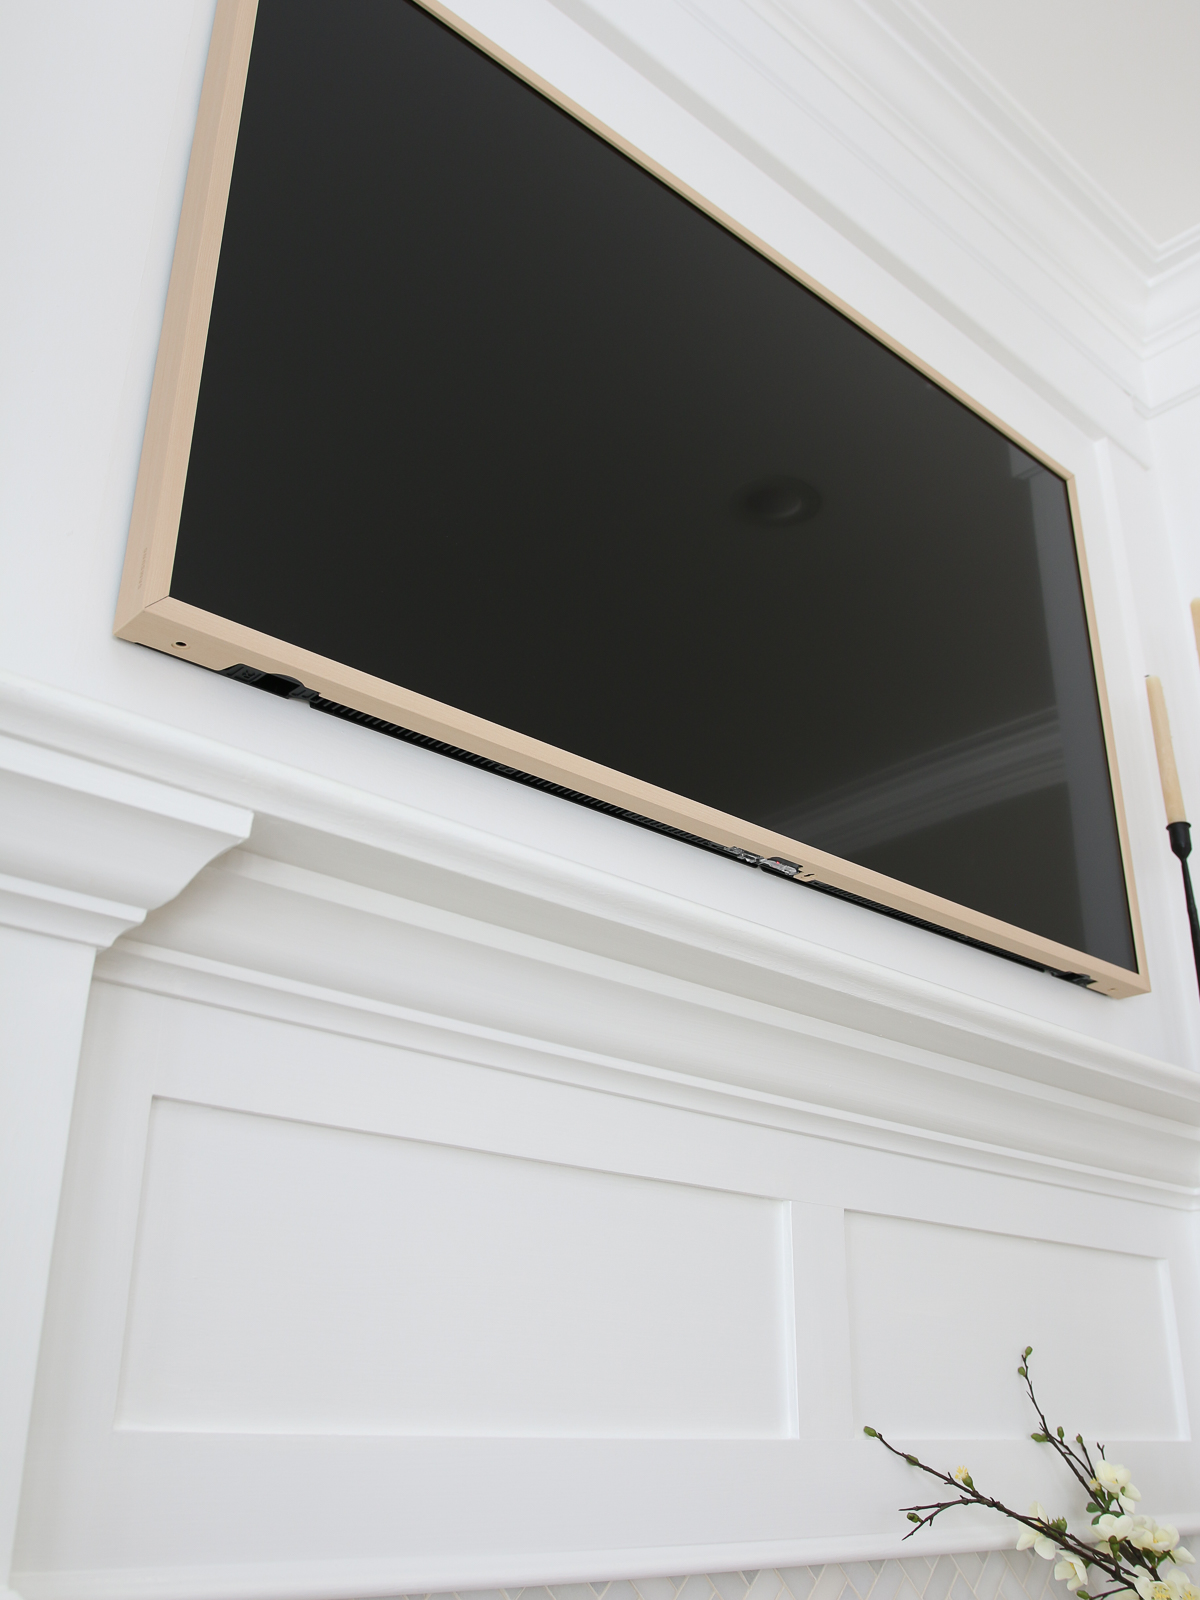 Frame tv with beige bezel view from below, openings for ventilation and signal transmission visible